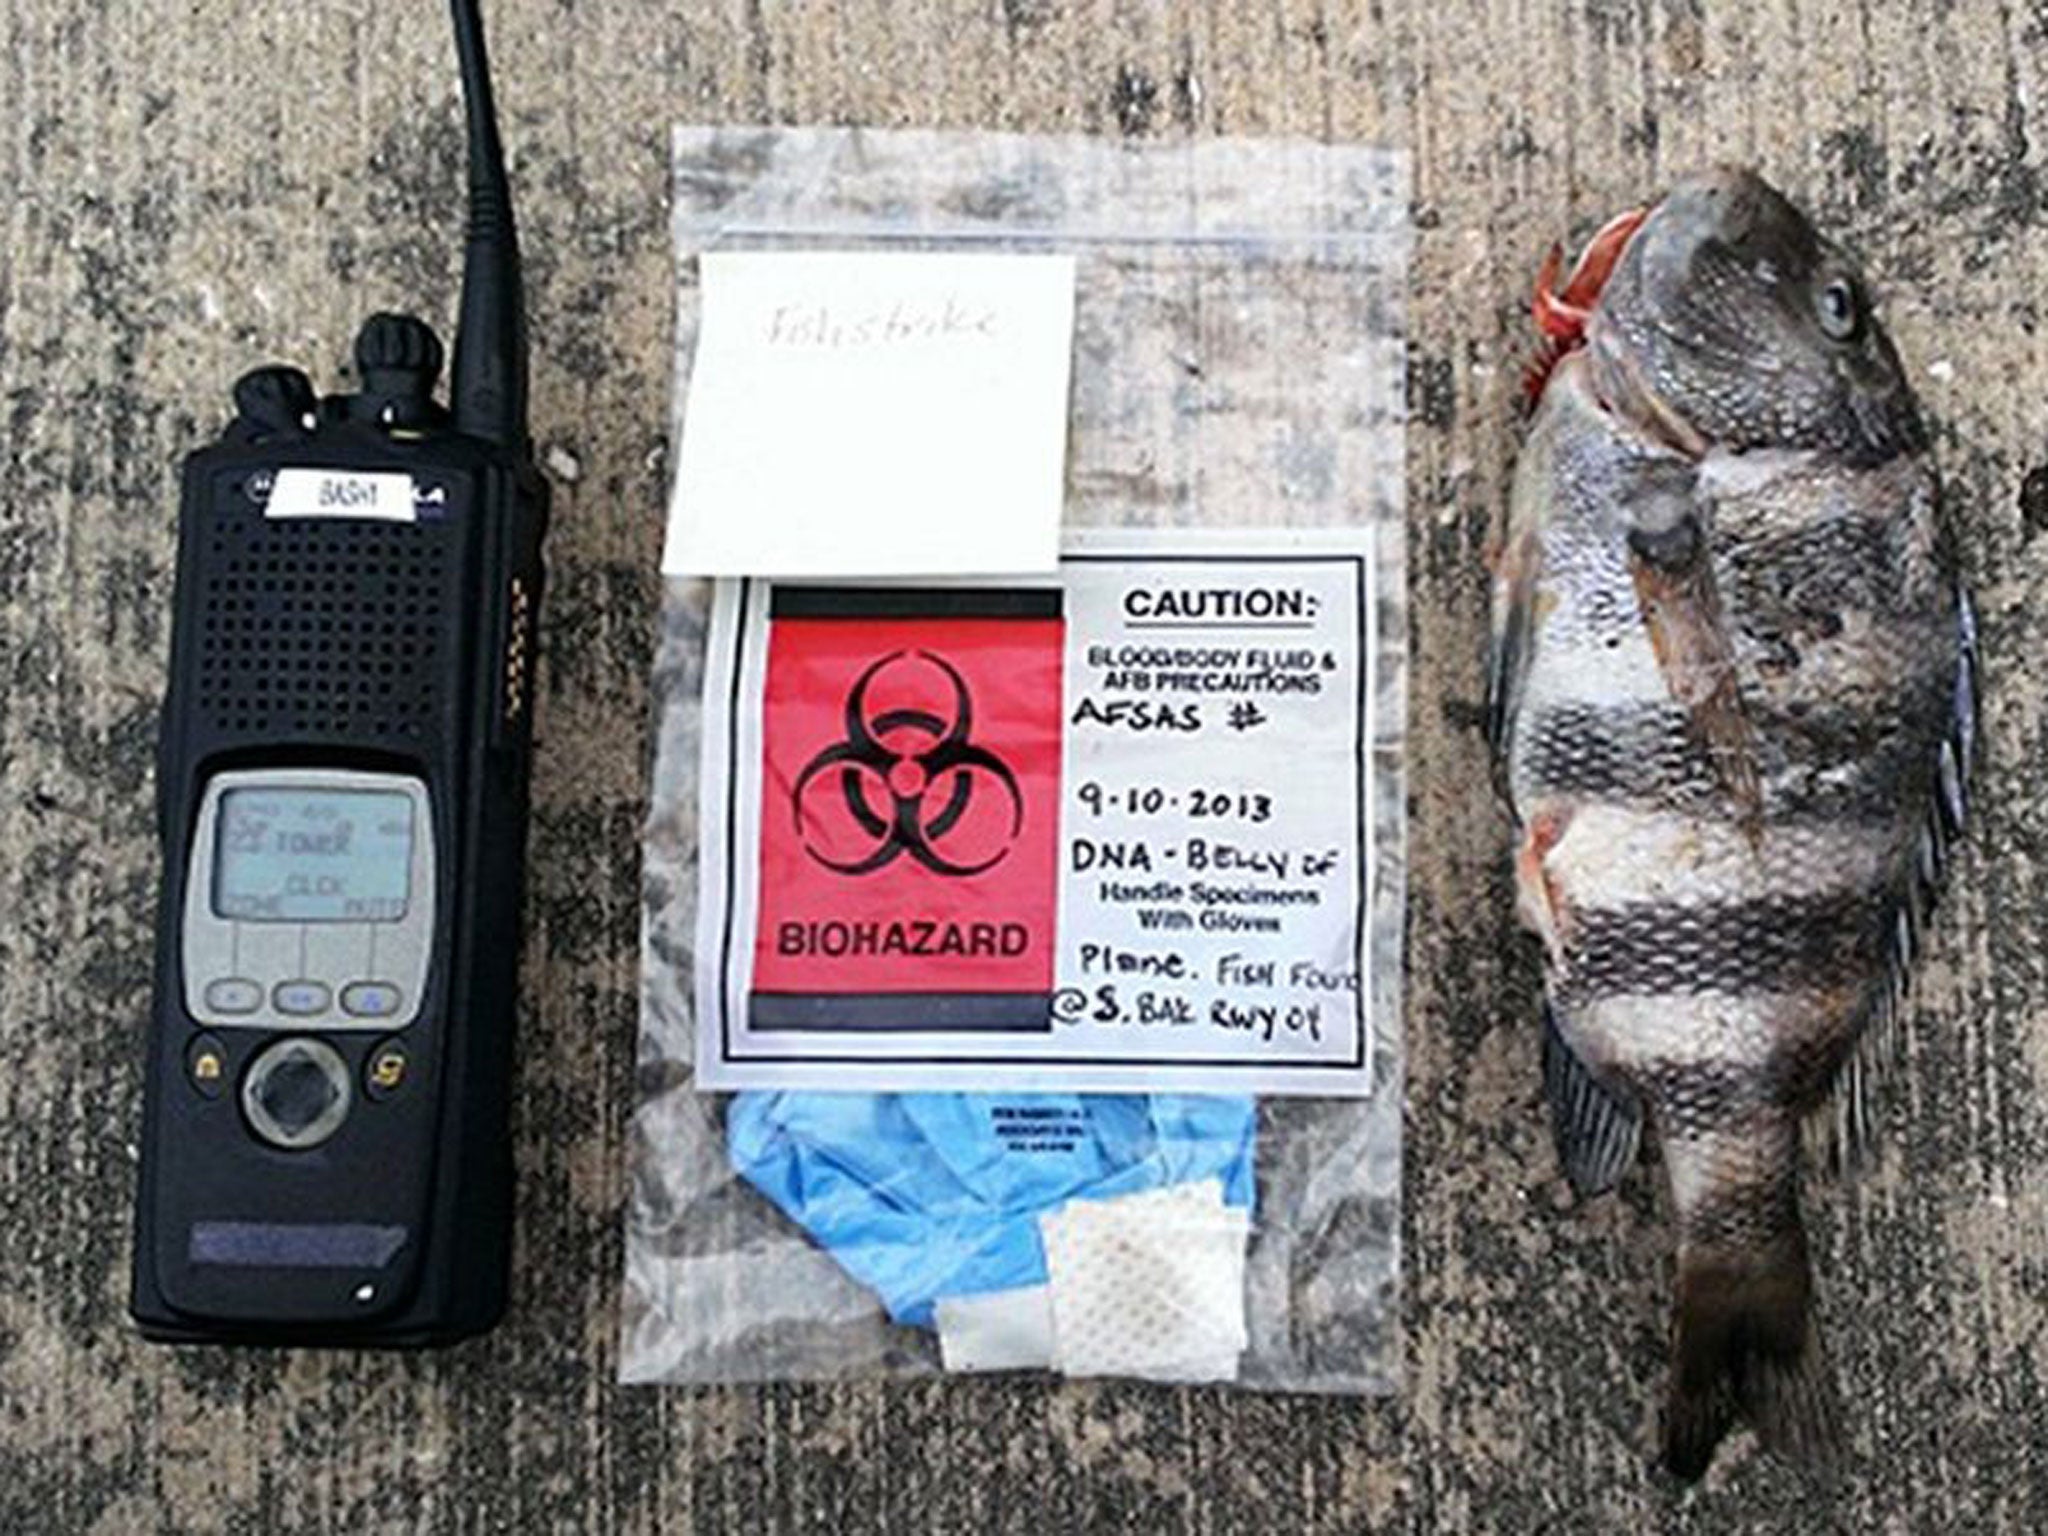 The sheepshead fish is shown on a runway along with a biohazard bag and radio for scale